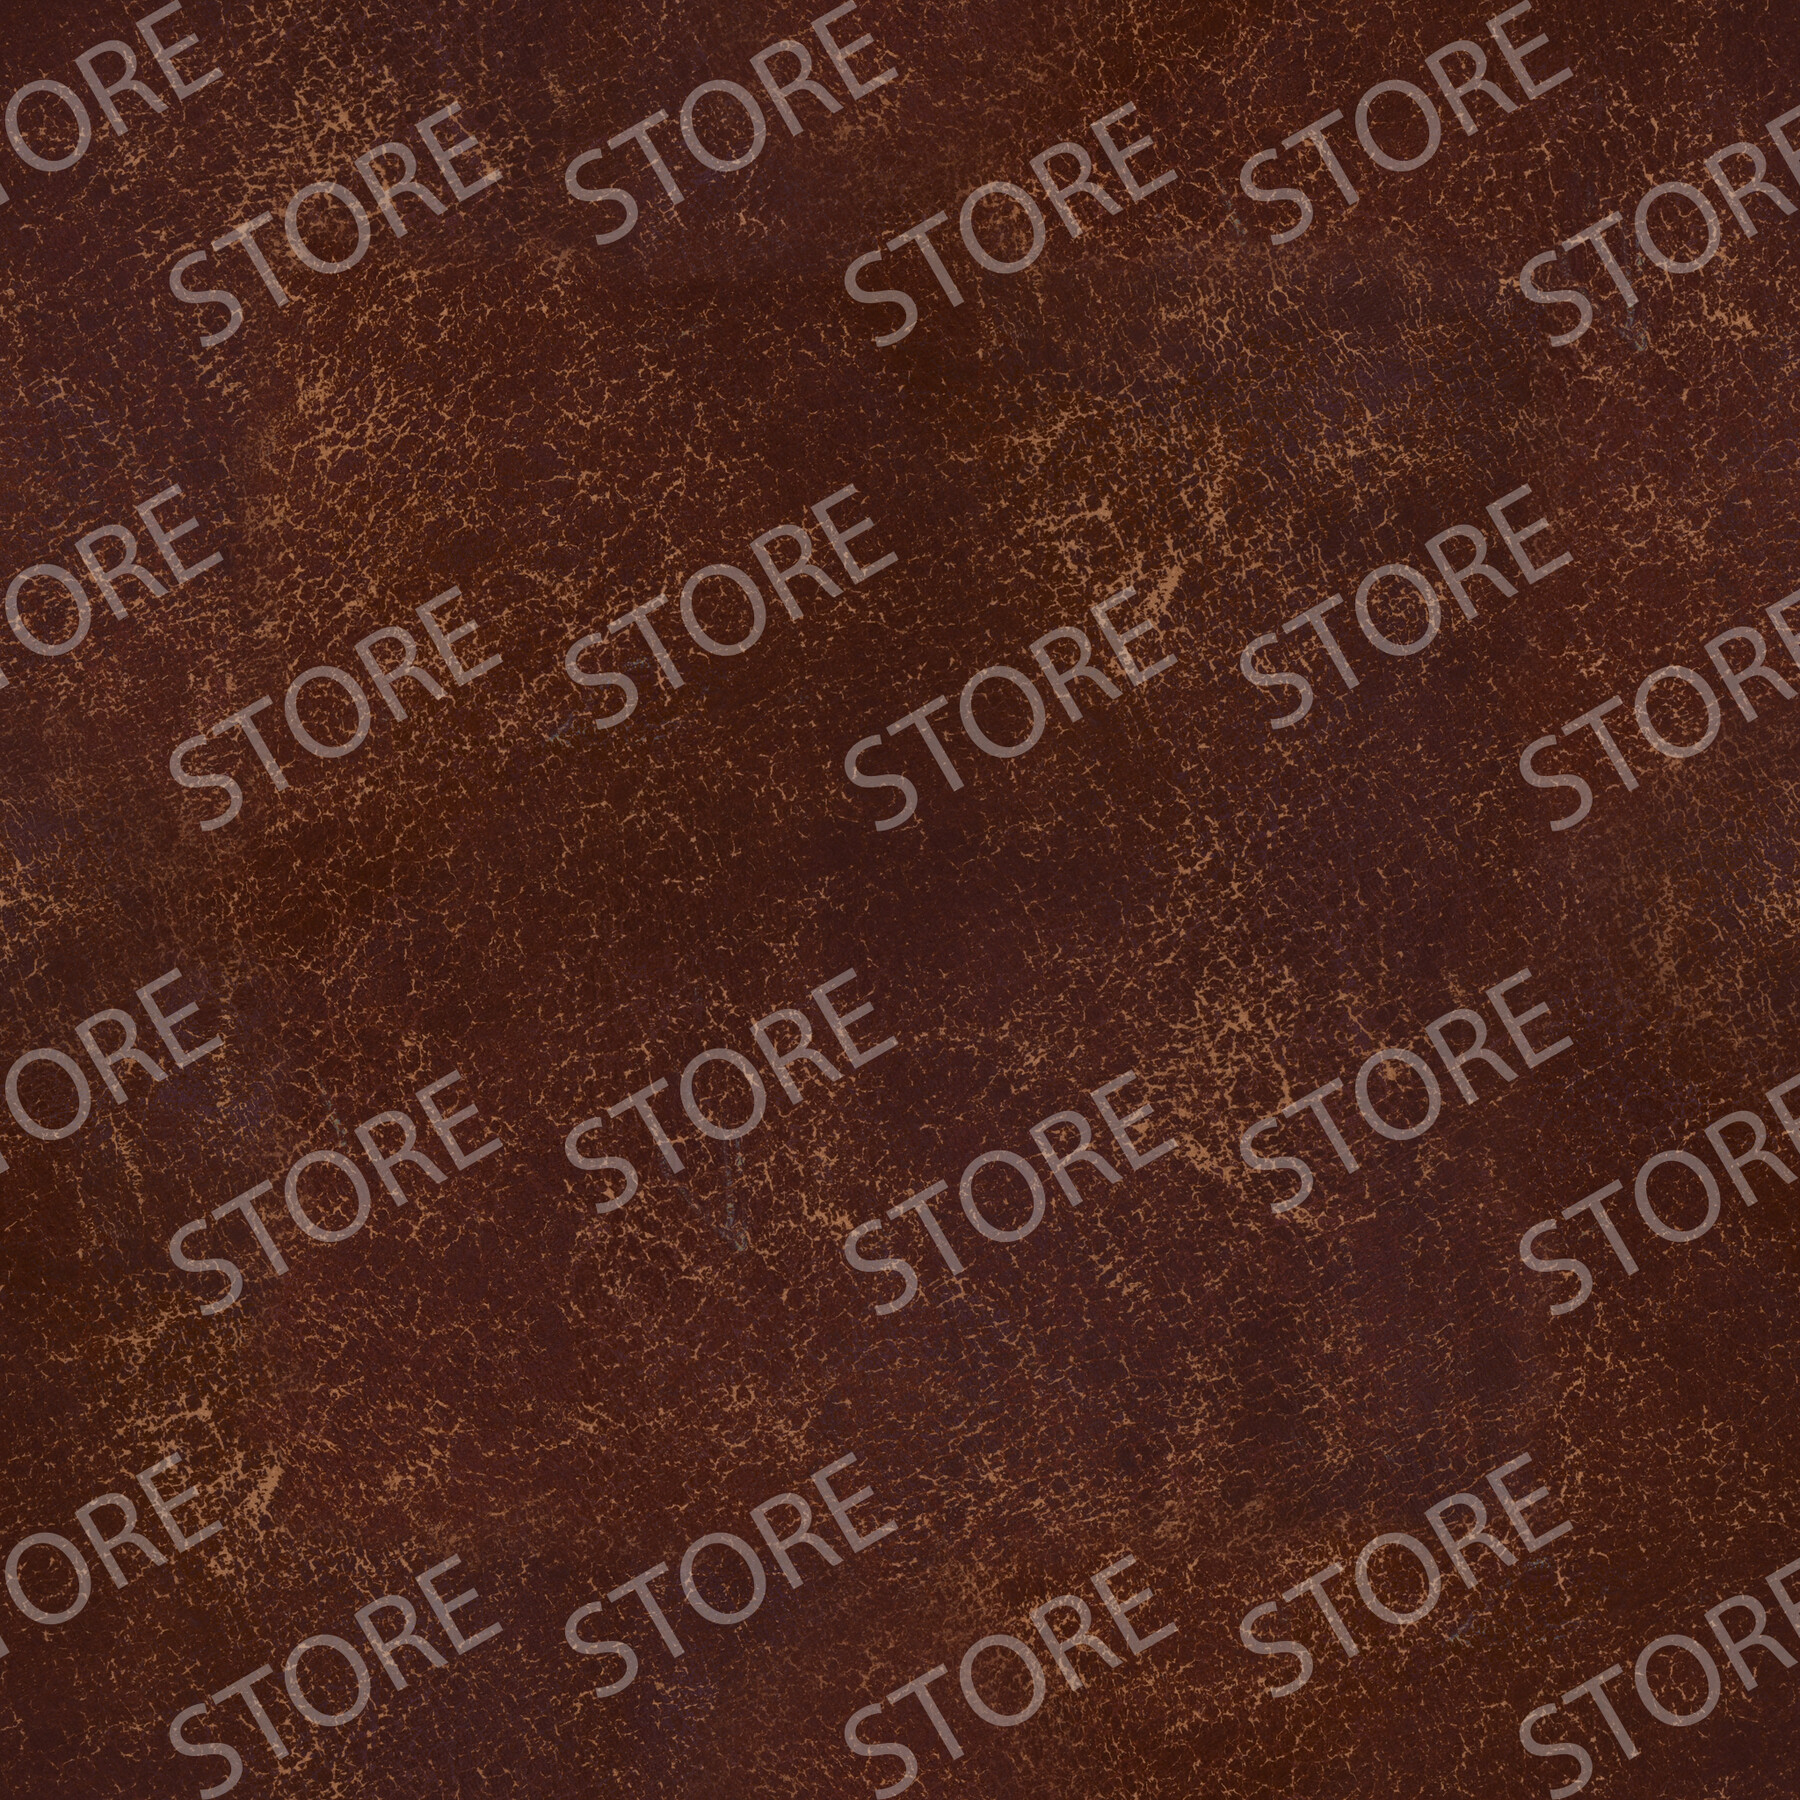 Suede leather, Seamless PBR Materials & Textures